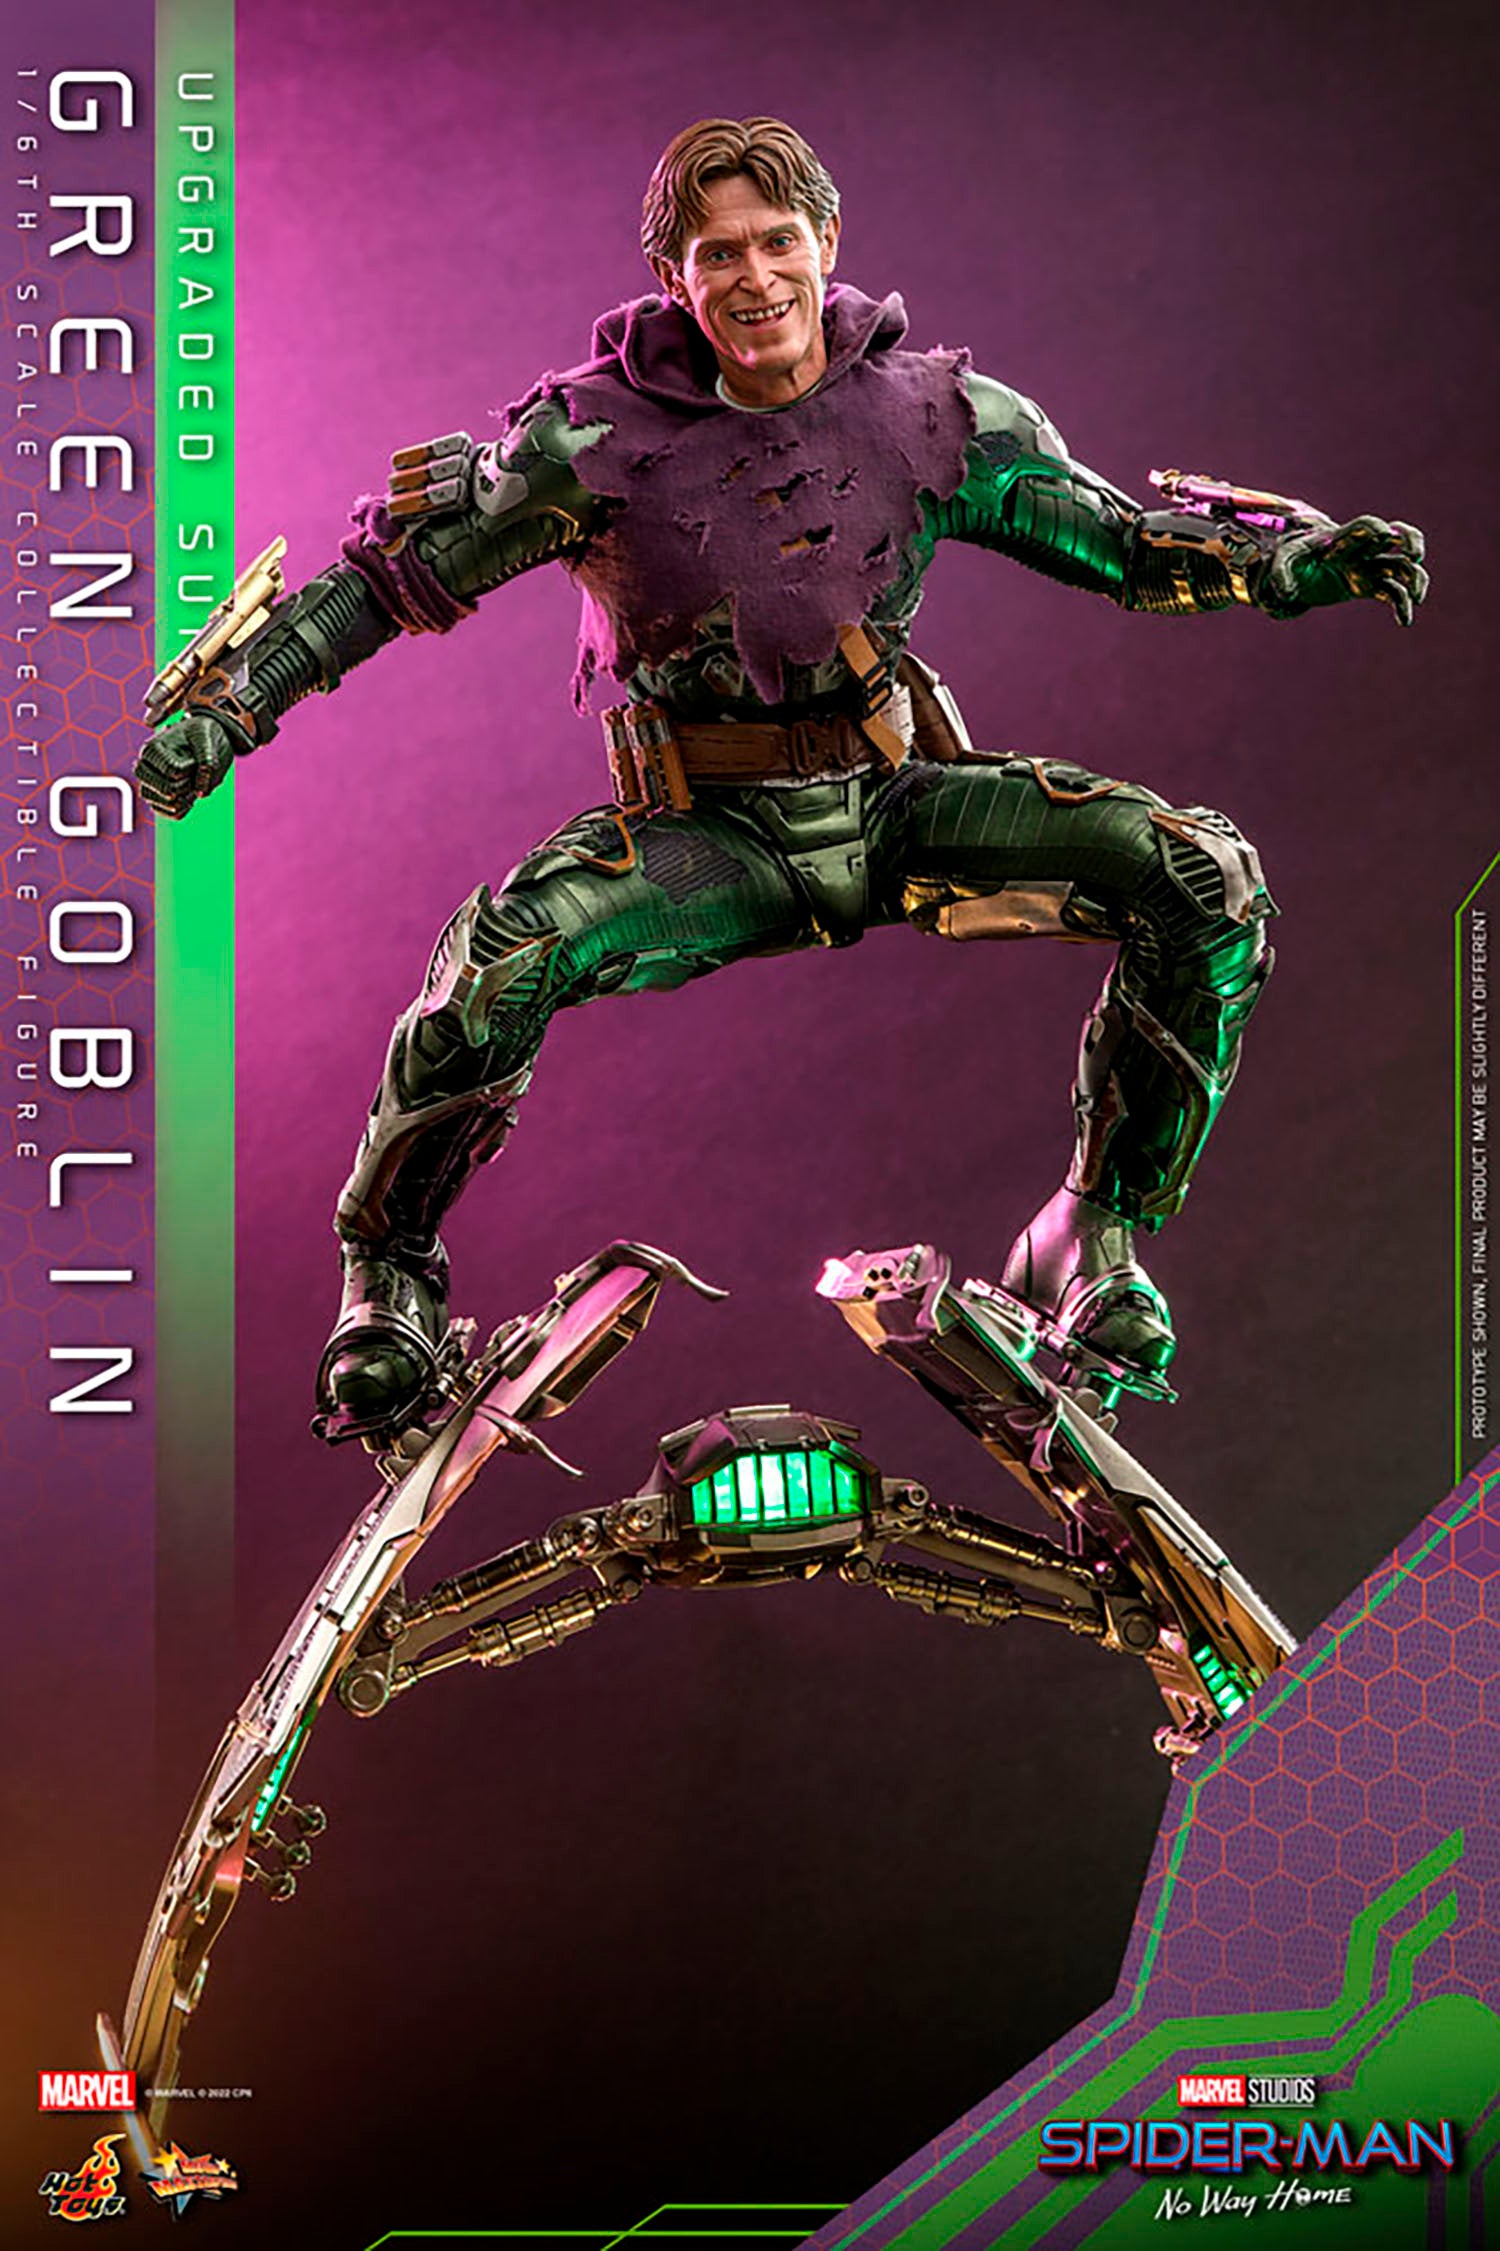 Hot Toys Marvel Green Goblin Upgraded Suit Spider Man No Way Home